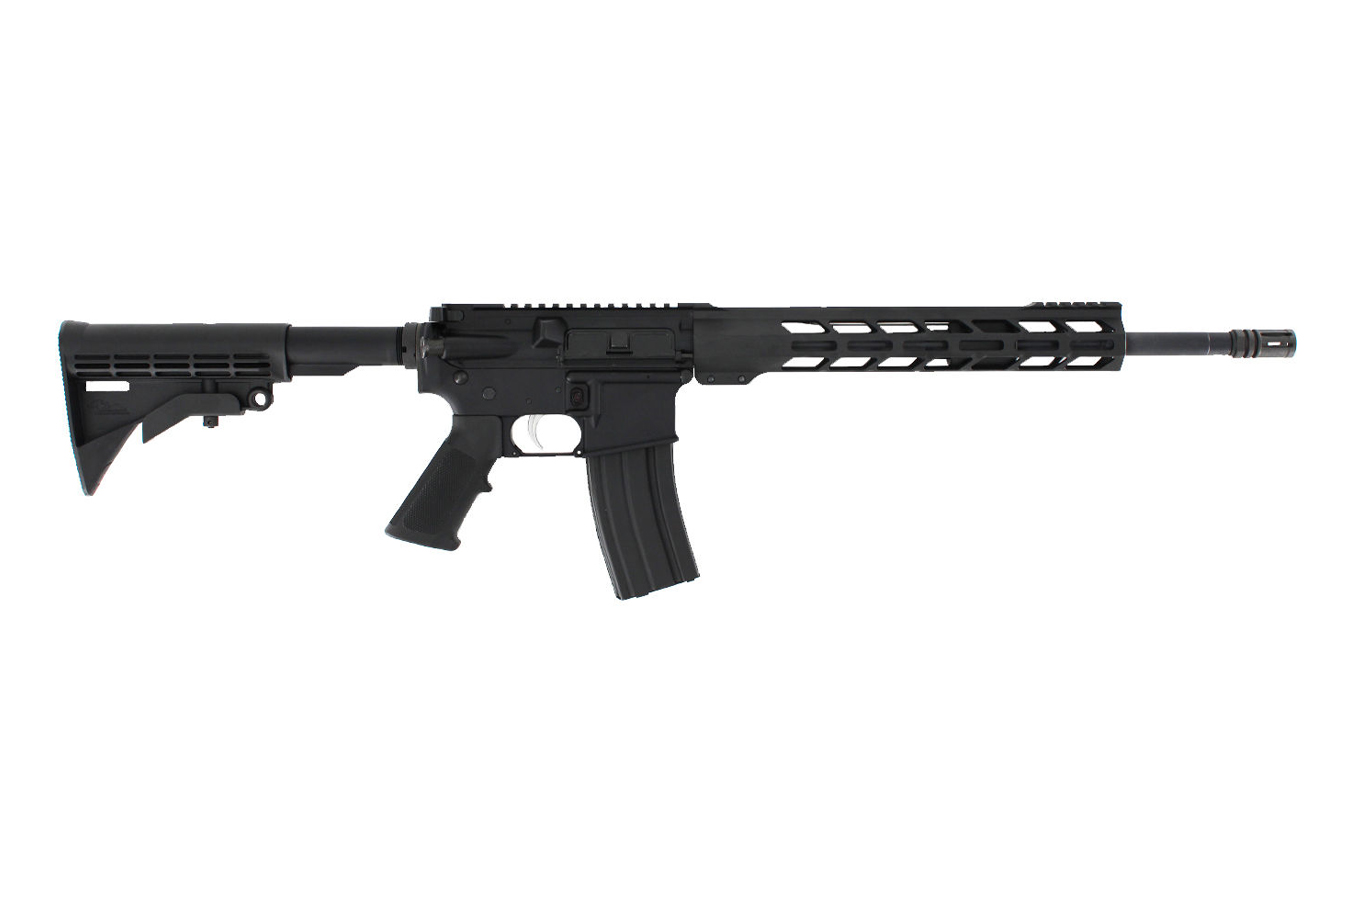 ANDERSON MANUFACTURING AM-15 5.56MM SEMI-AUTOMATIC RIFLE WITH 13-INCH M-LOK HANDGUARD